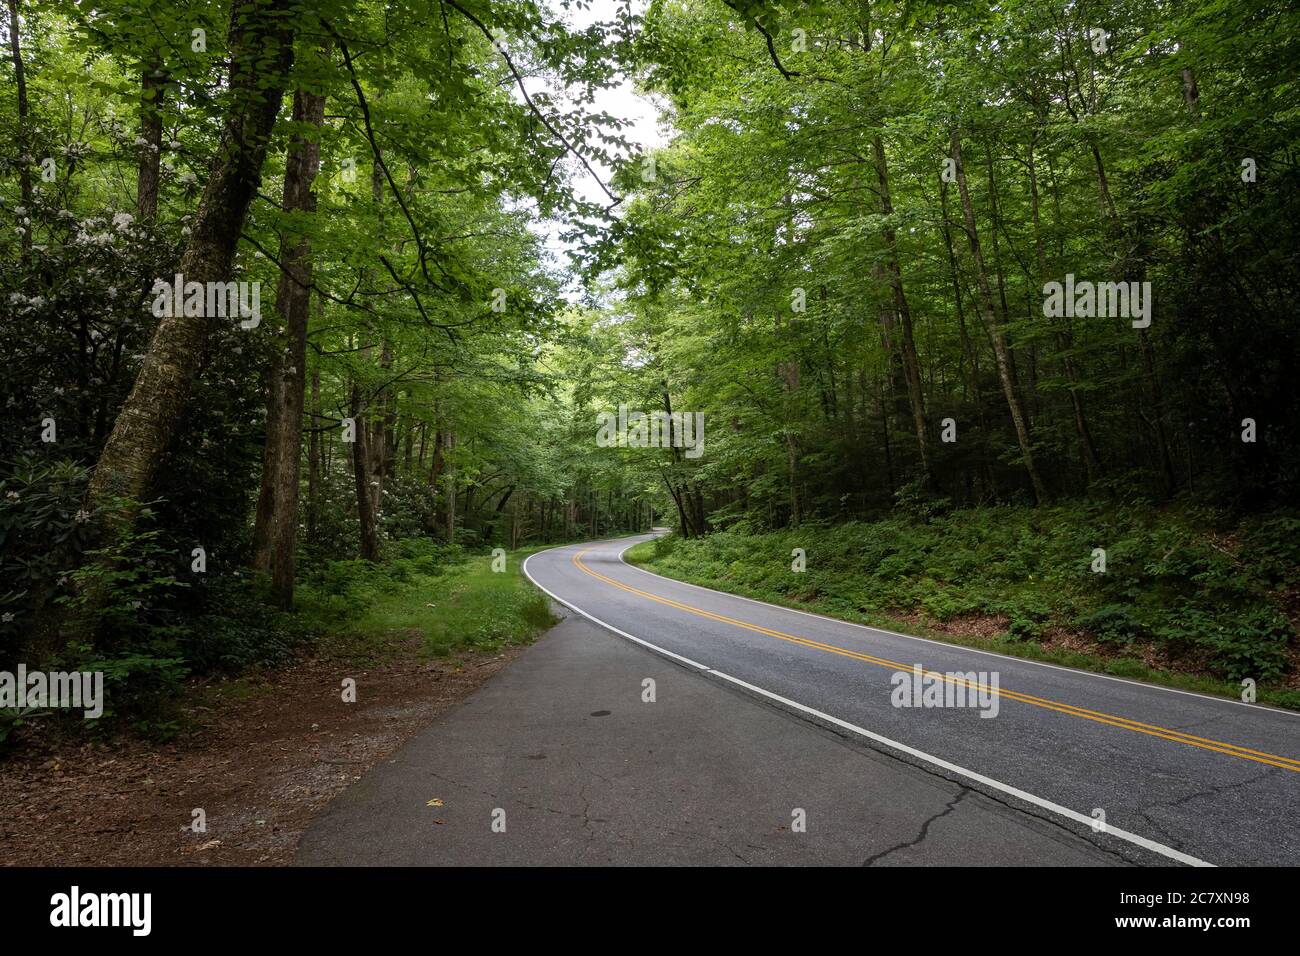 A road winding through a dense forest outside of Asheville North Carolina Stock Photo